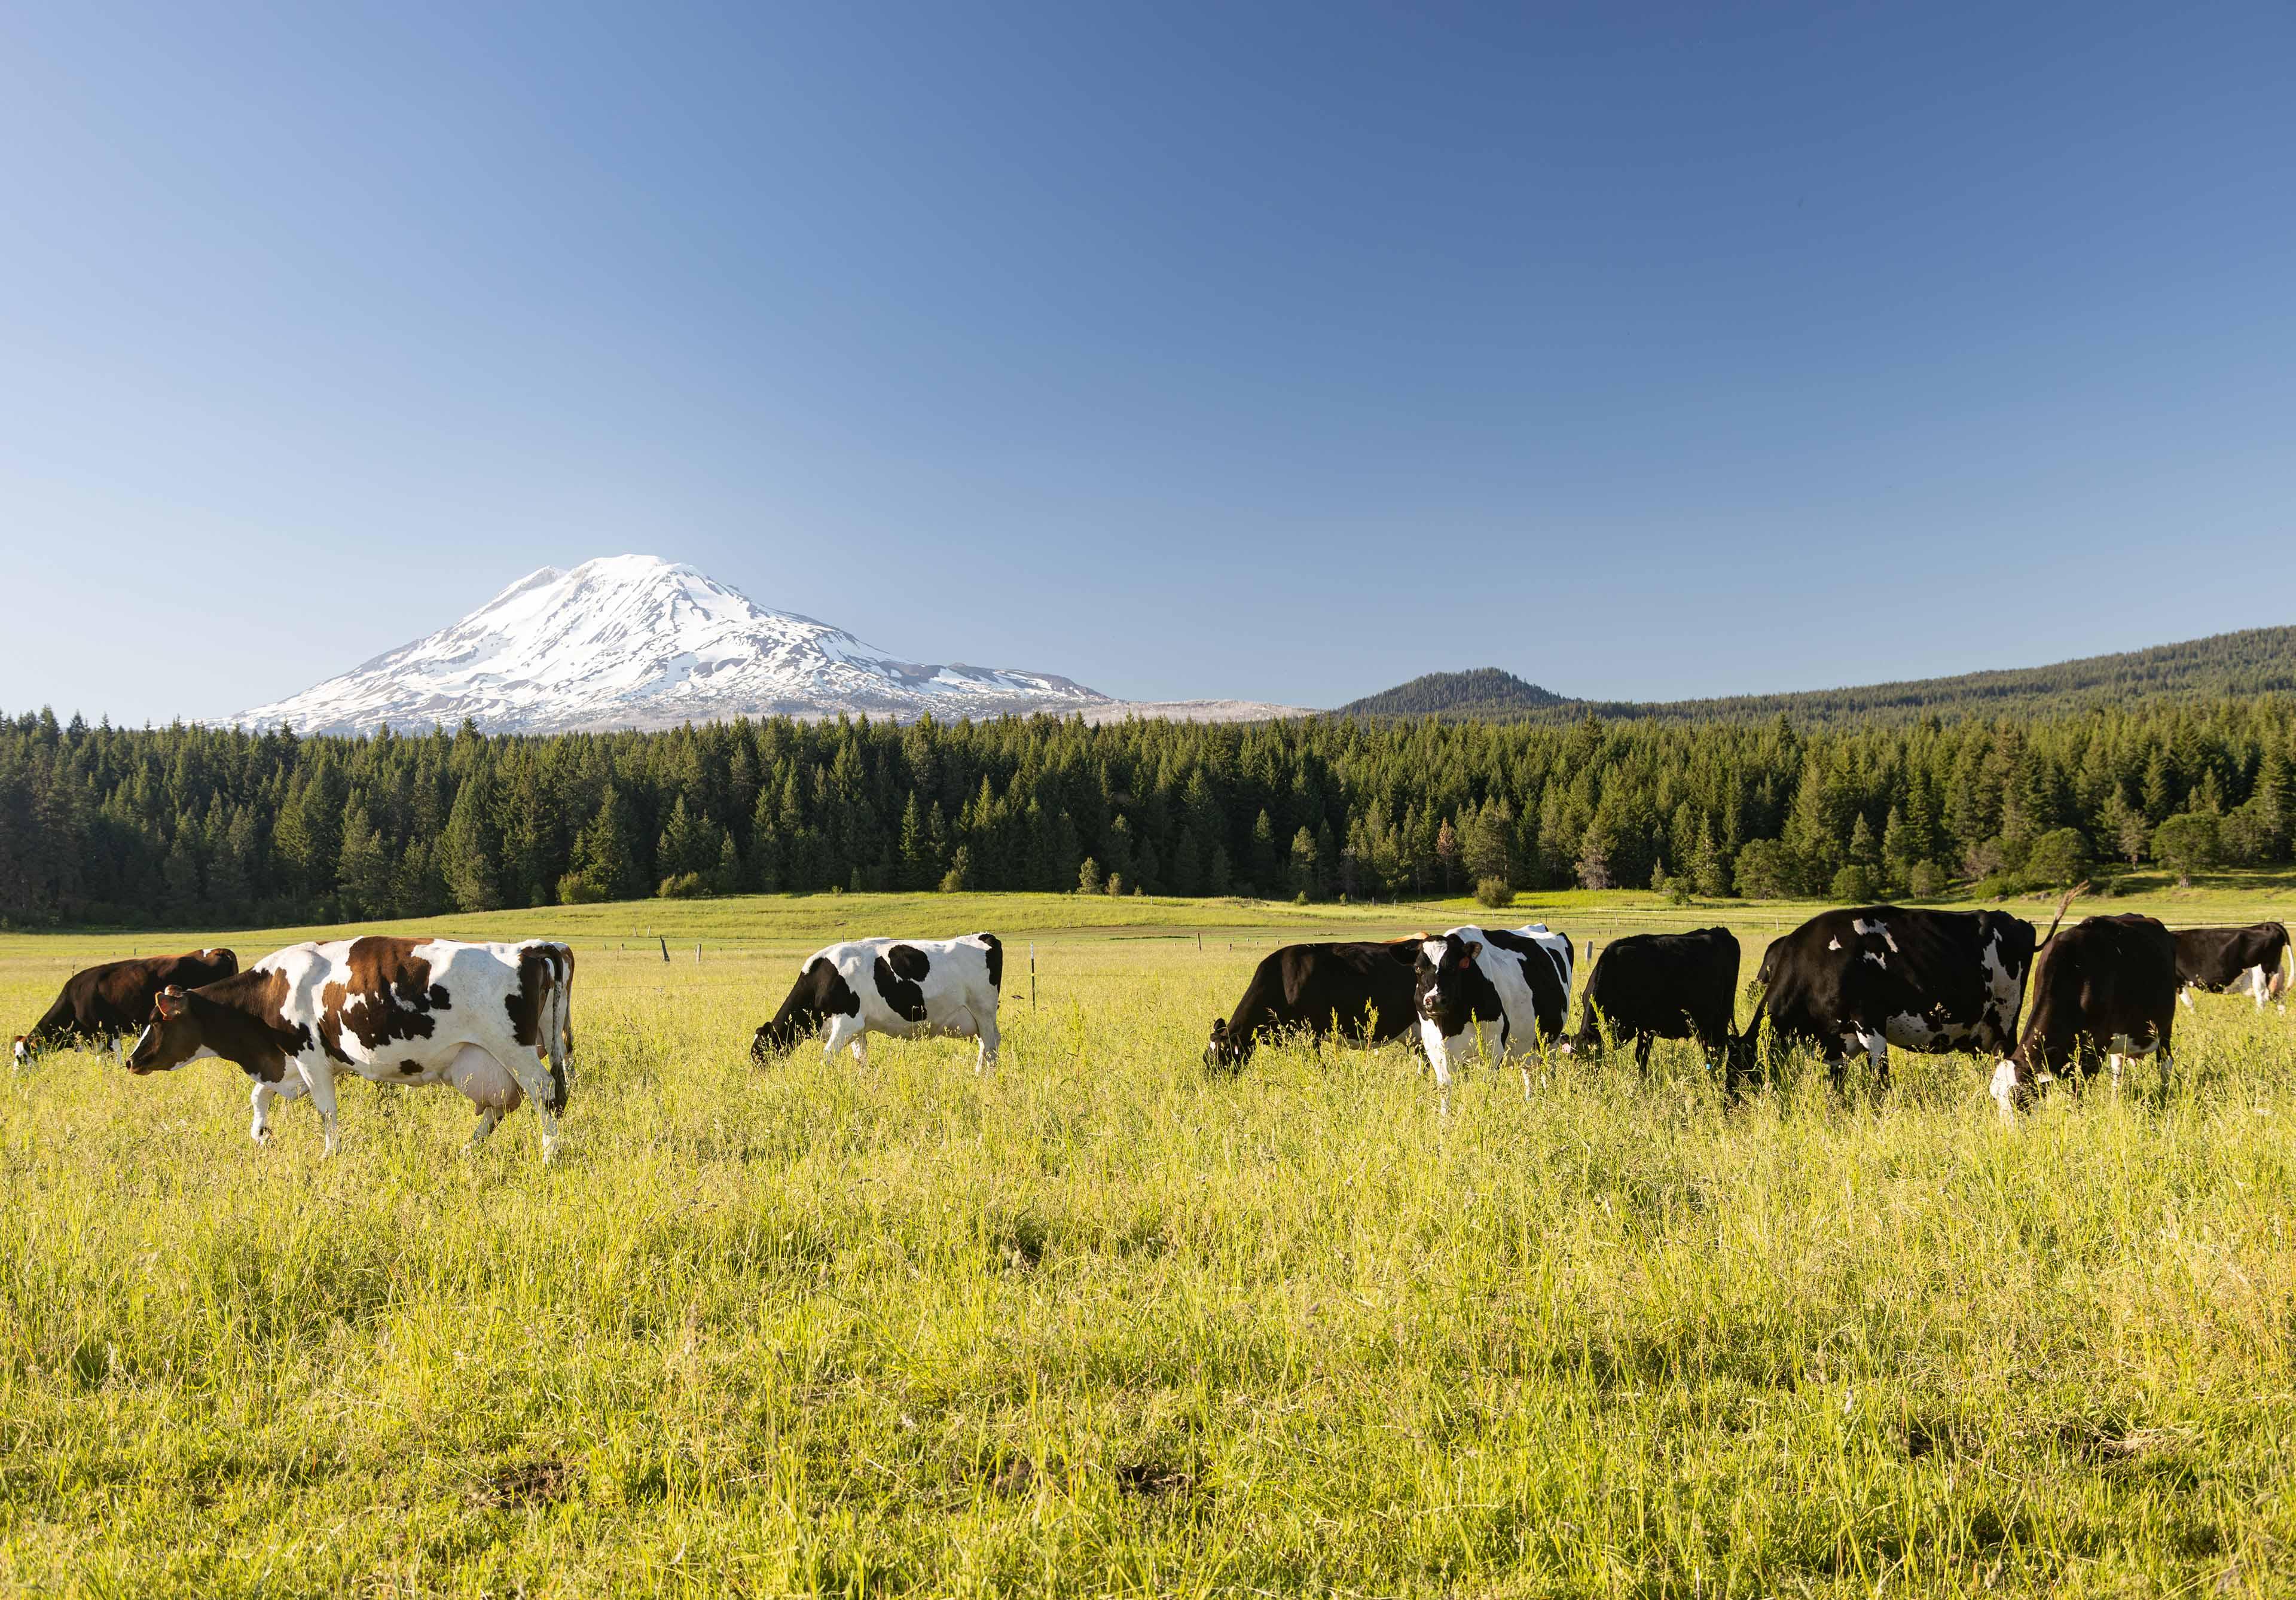 Cows grazing in fresh organic pasture with mountains in the background.